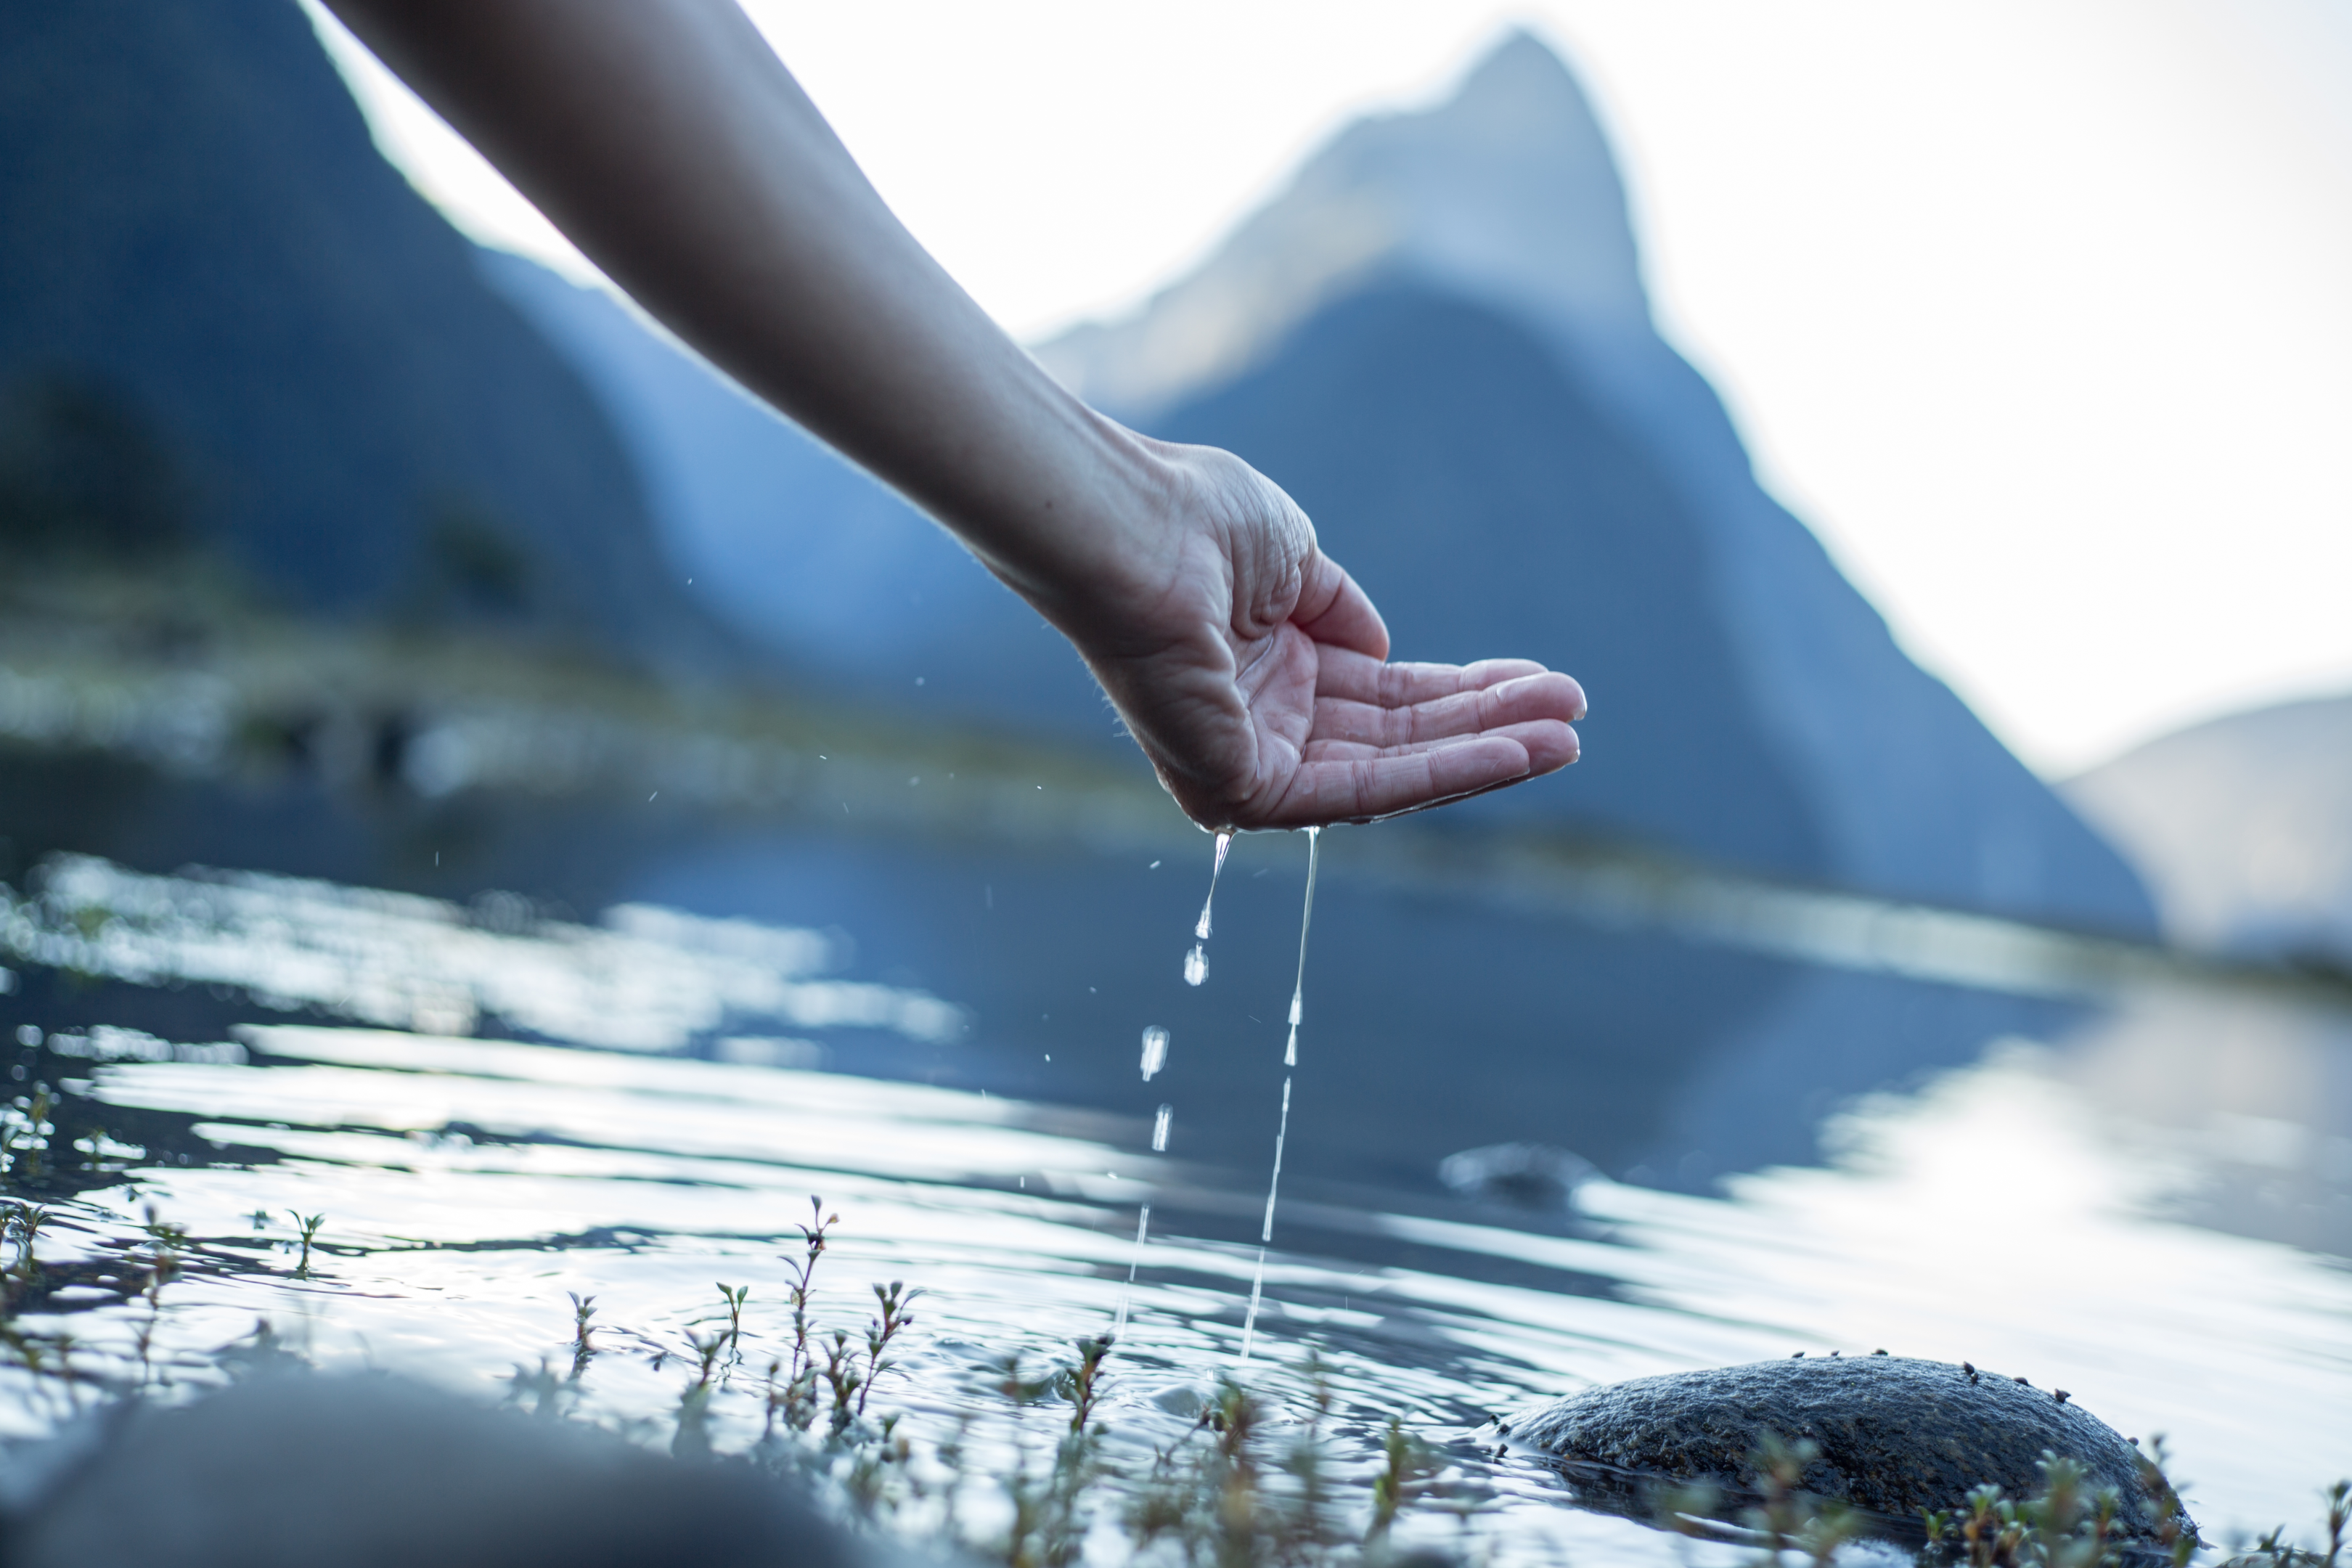 A cupped hand to catch the fresh water from the lake